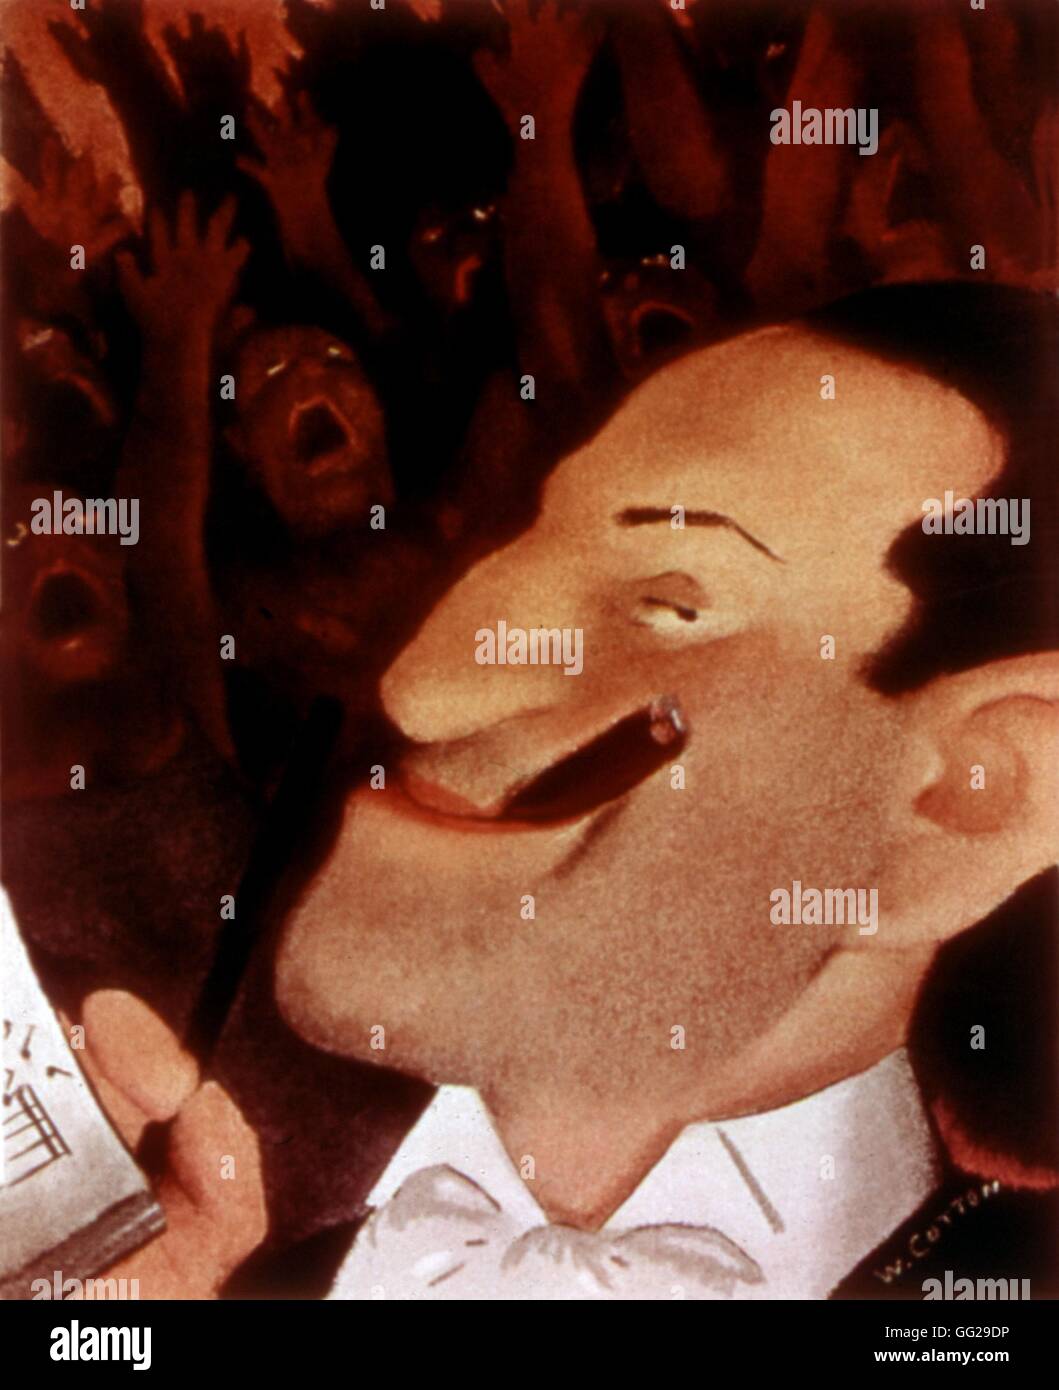 George Gershwin conducting his folk opera 'Porgy and Bess' in 'Vanity Fair' 1935 United States Washington. Library of Congress Stock Photo